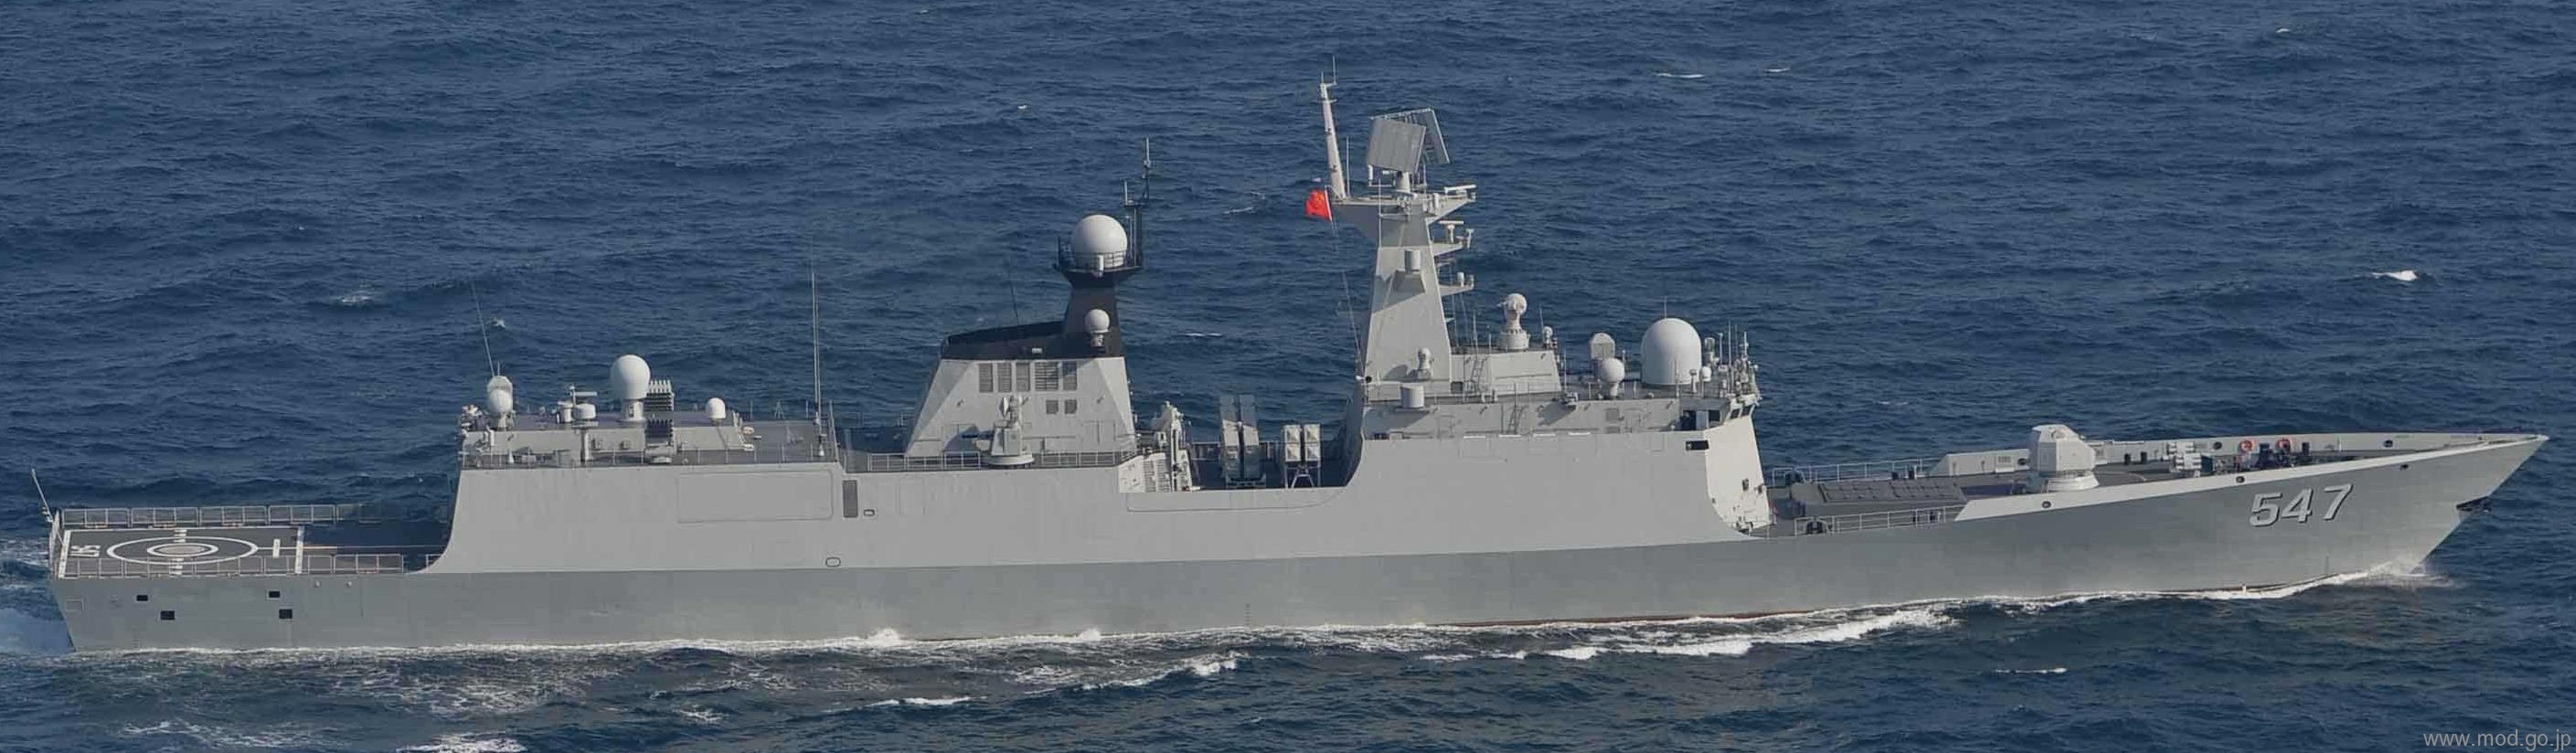 ffg-547 plans linyi type 054a jiangkai ii class guided missile frigate china people's liberation army navy 03